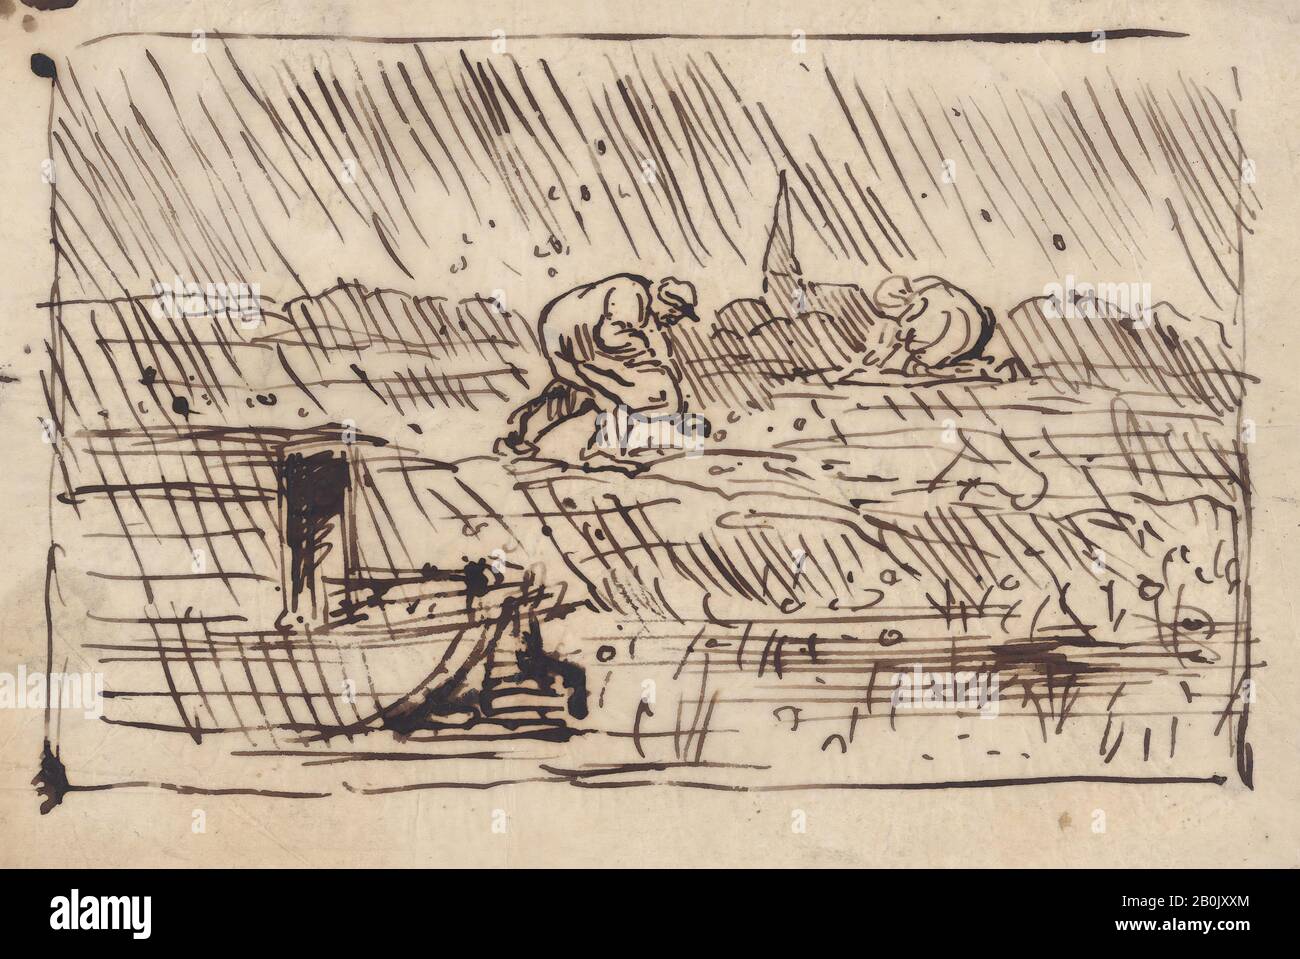 Charles-François Daubigny, Gleaners in the Hail, Charles-François Daubigny (French, Paris 1817–1878 Paris), 1862, Pen and ink on tracing paper, Sheet: 4 3/4 × 7 1/16 in. (12 × 18 cm), Drawings Stock Photo